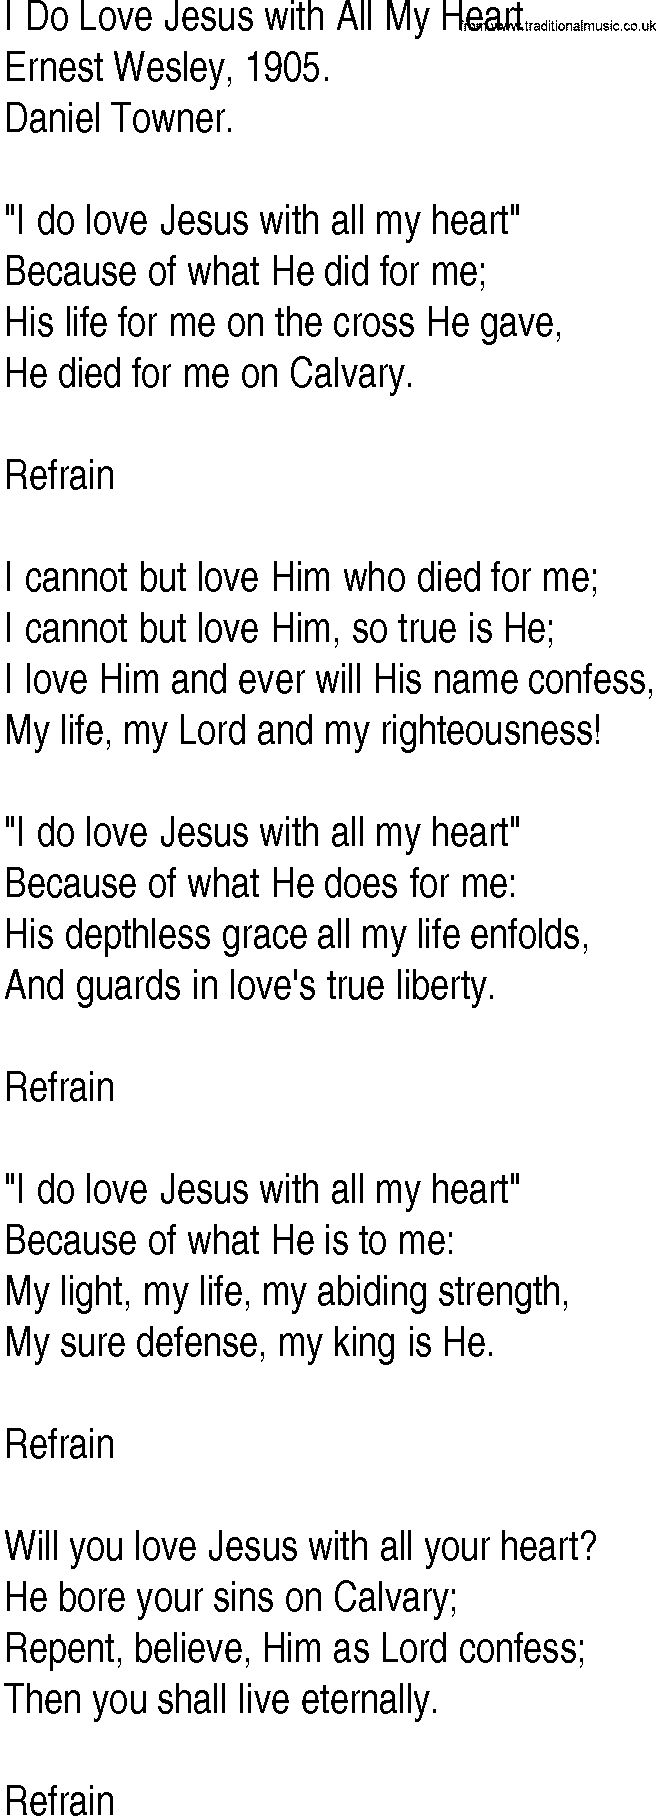 Hymn and Gospel Song: I Do Love Jesus with All My Heart by Ernest Wesley lyrics